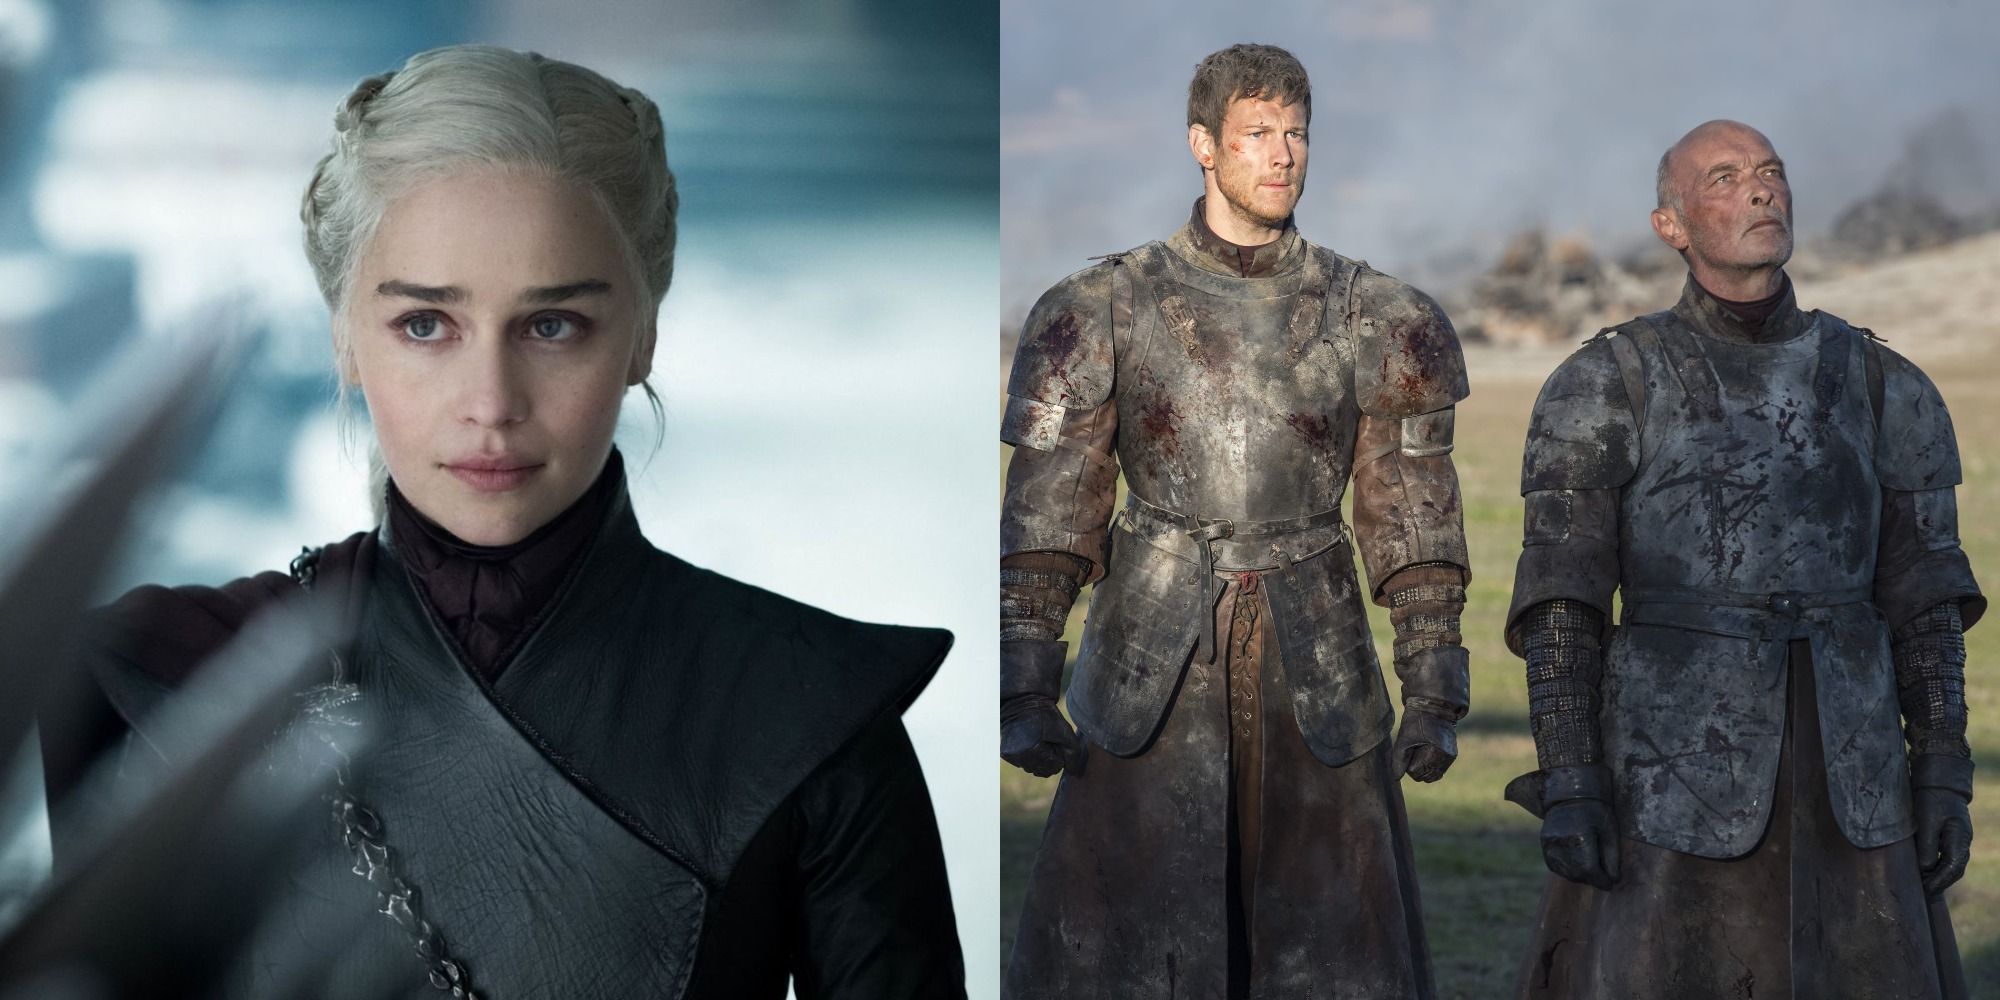 Split image showing Daenerys looking serious and Dickon and Randyll Tarly before their death in Game of Thrones